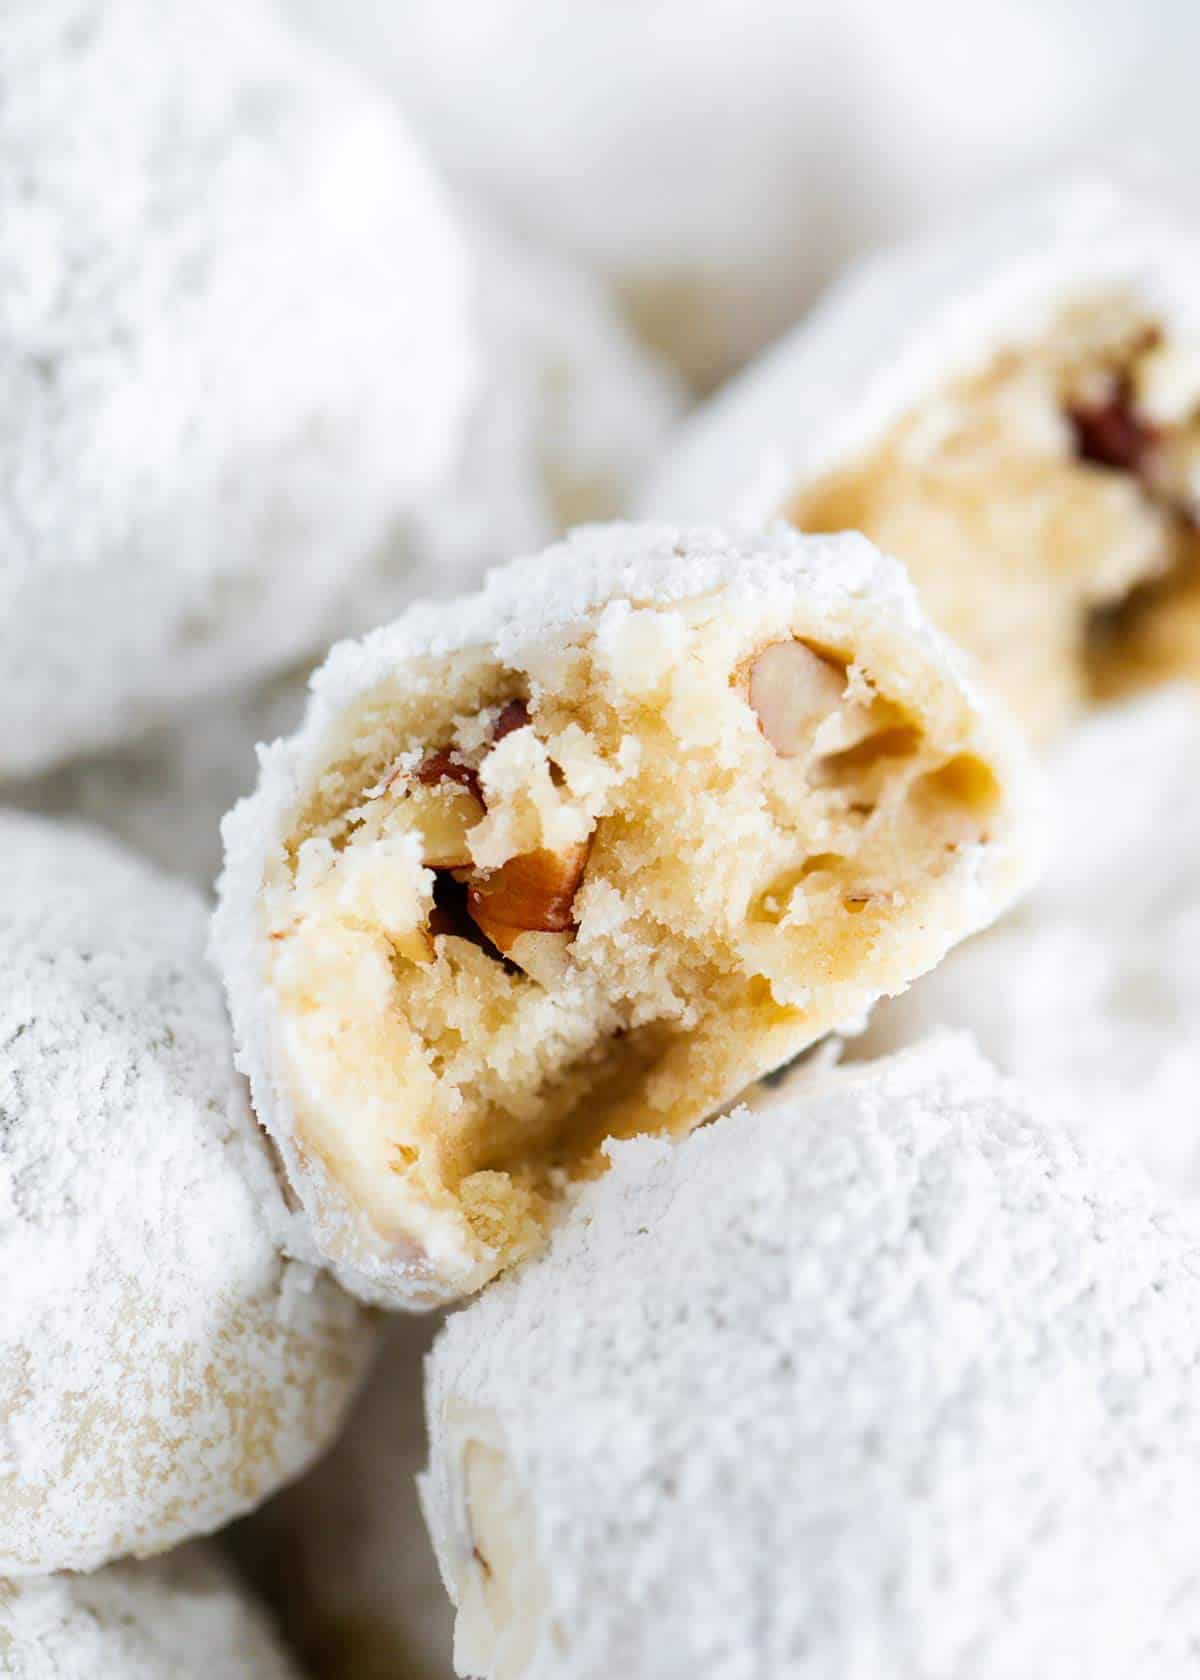 Mexican wedding cookies with a bite taken.